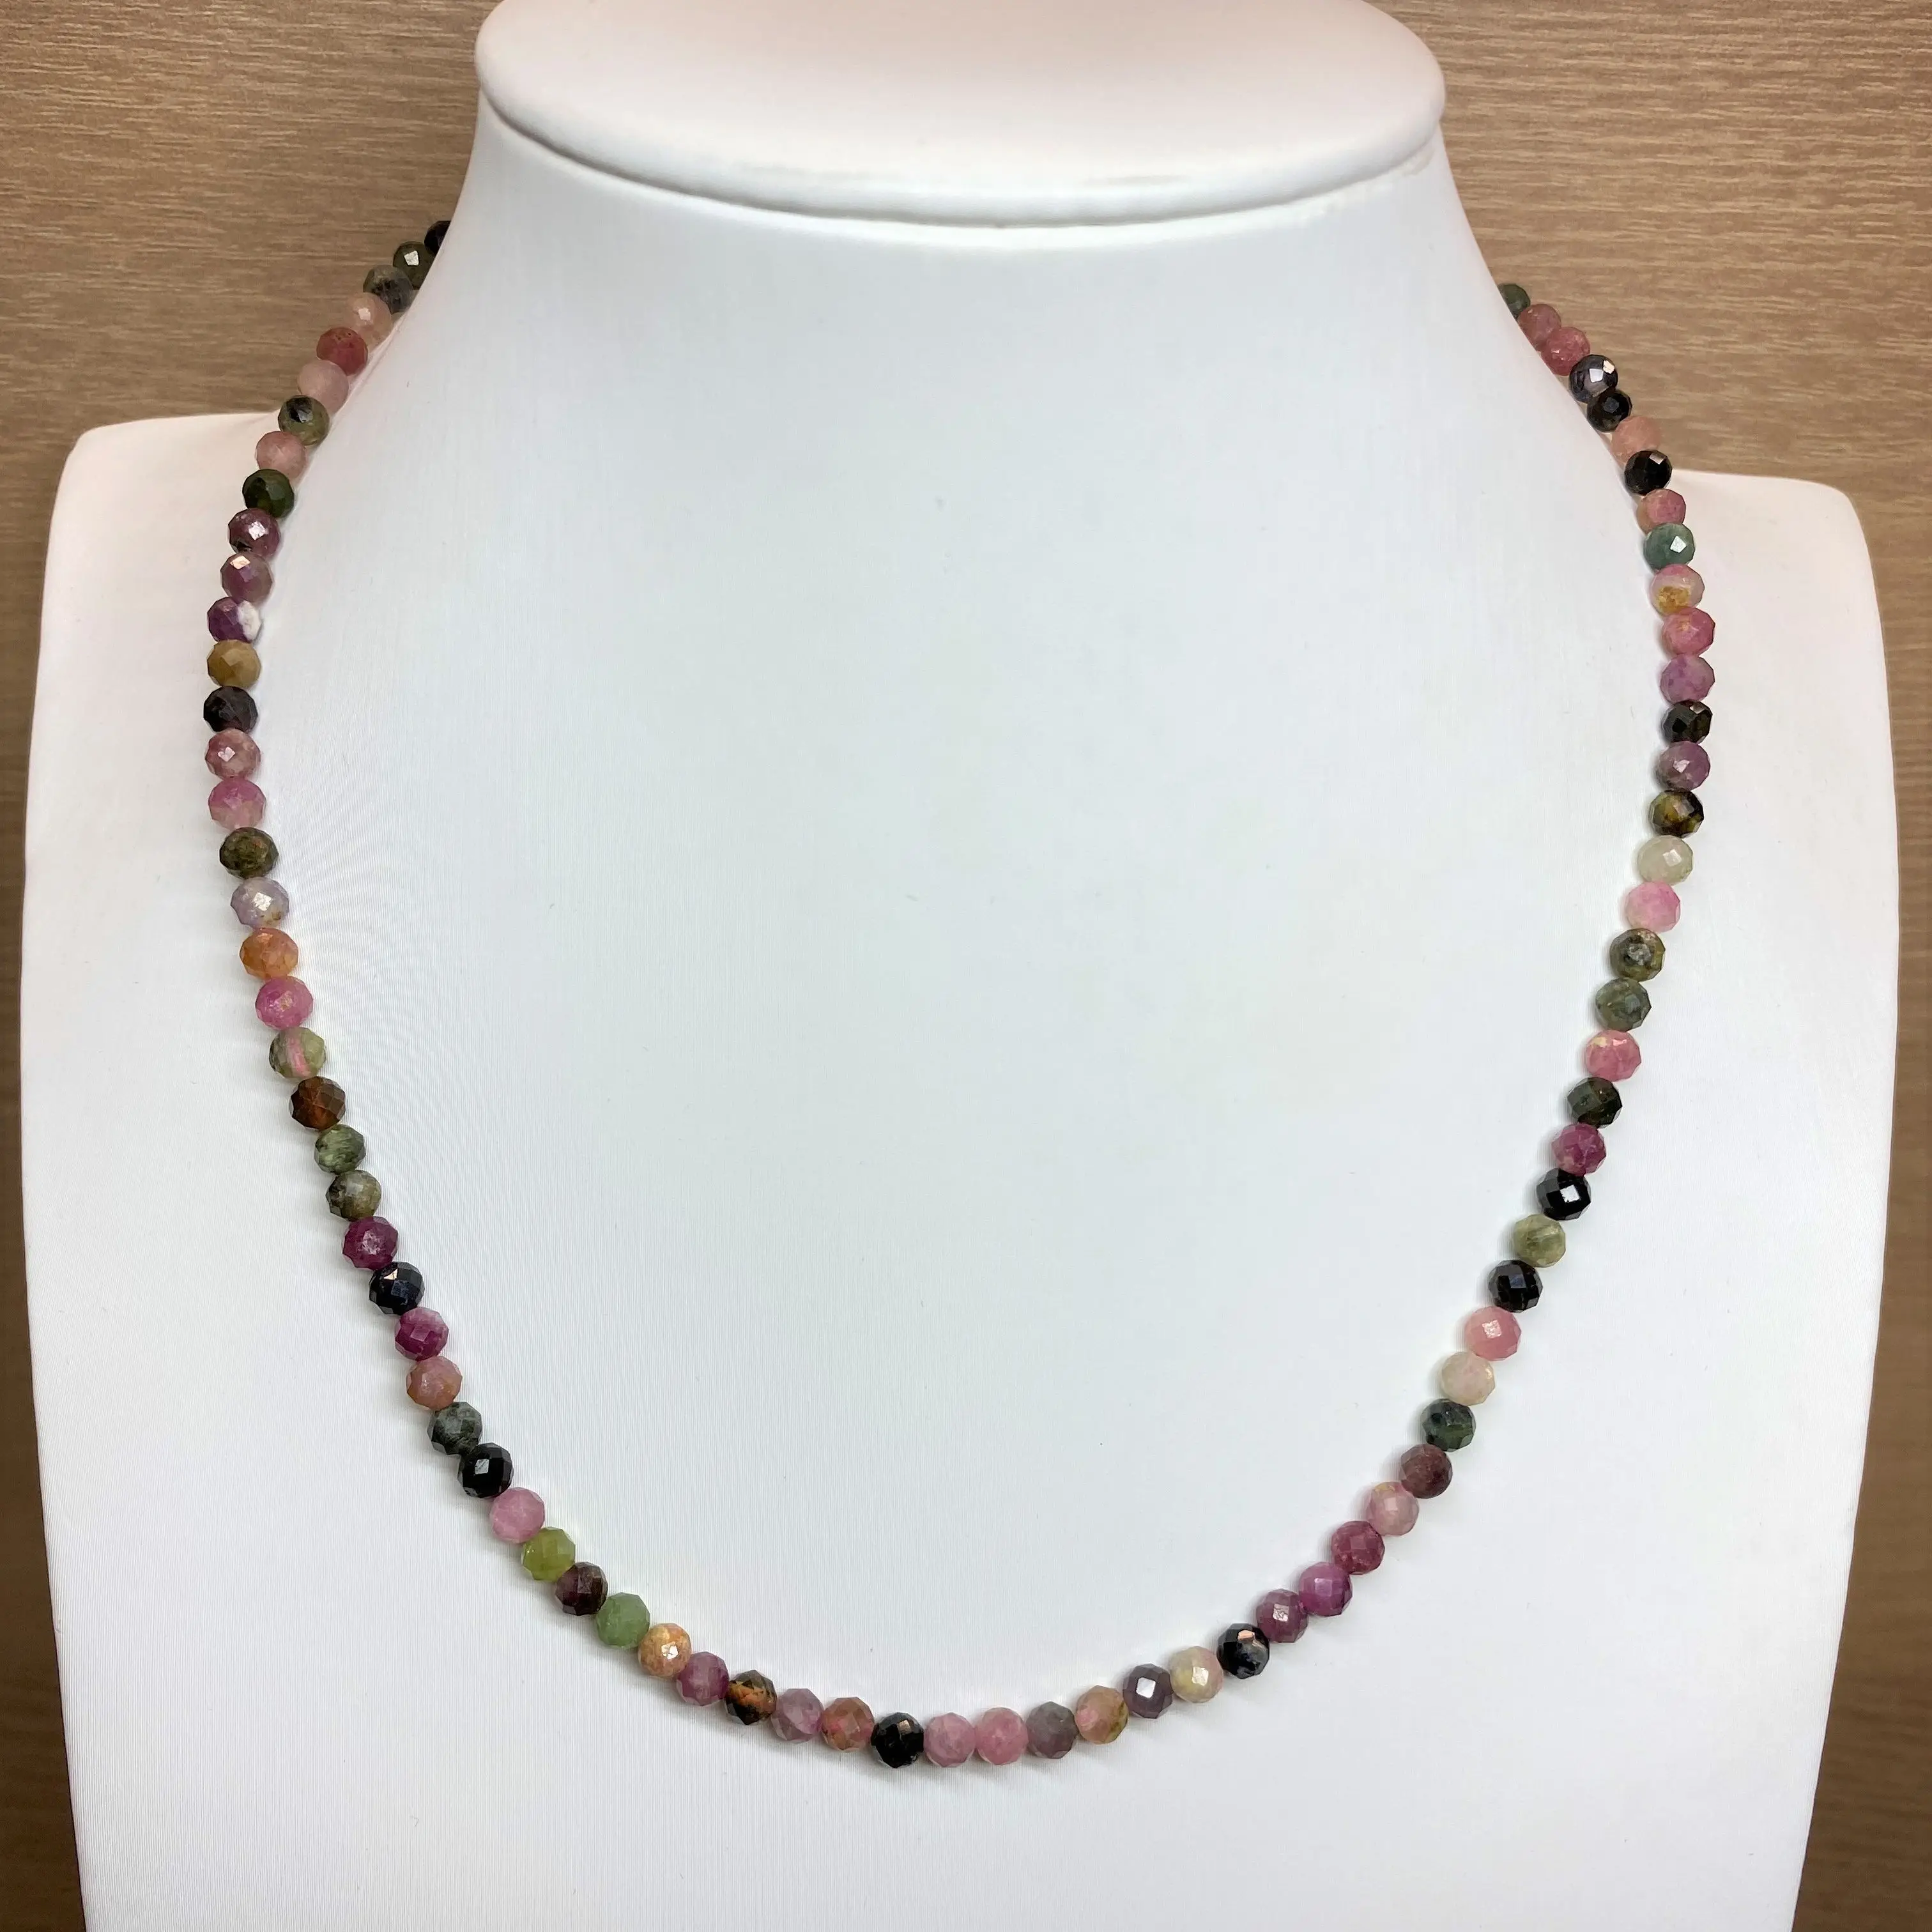 

4MM Faceted Tourmaline Necklace Rainbow Multicolor Gemstones Natural Stones Beaded Gold S925 Silver Collier Women BOHO Necklace